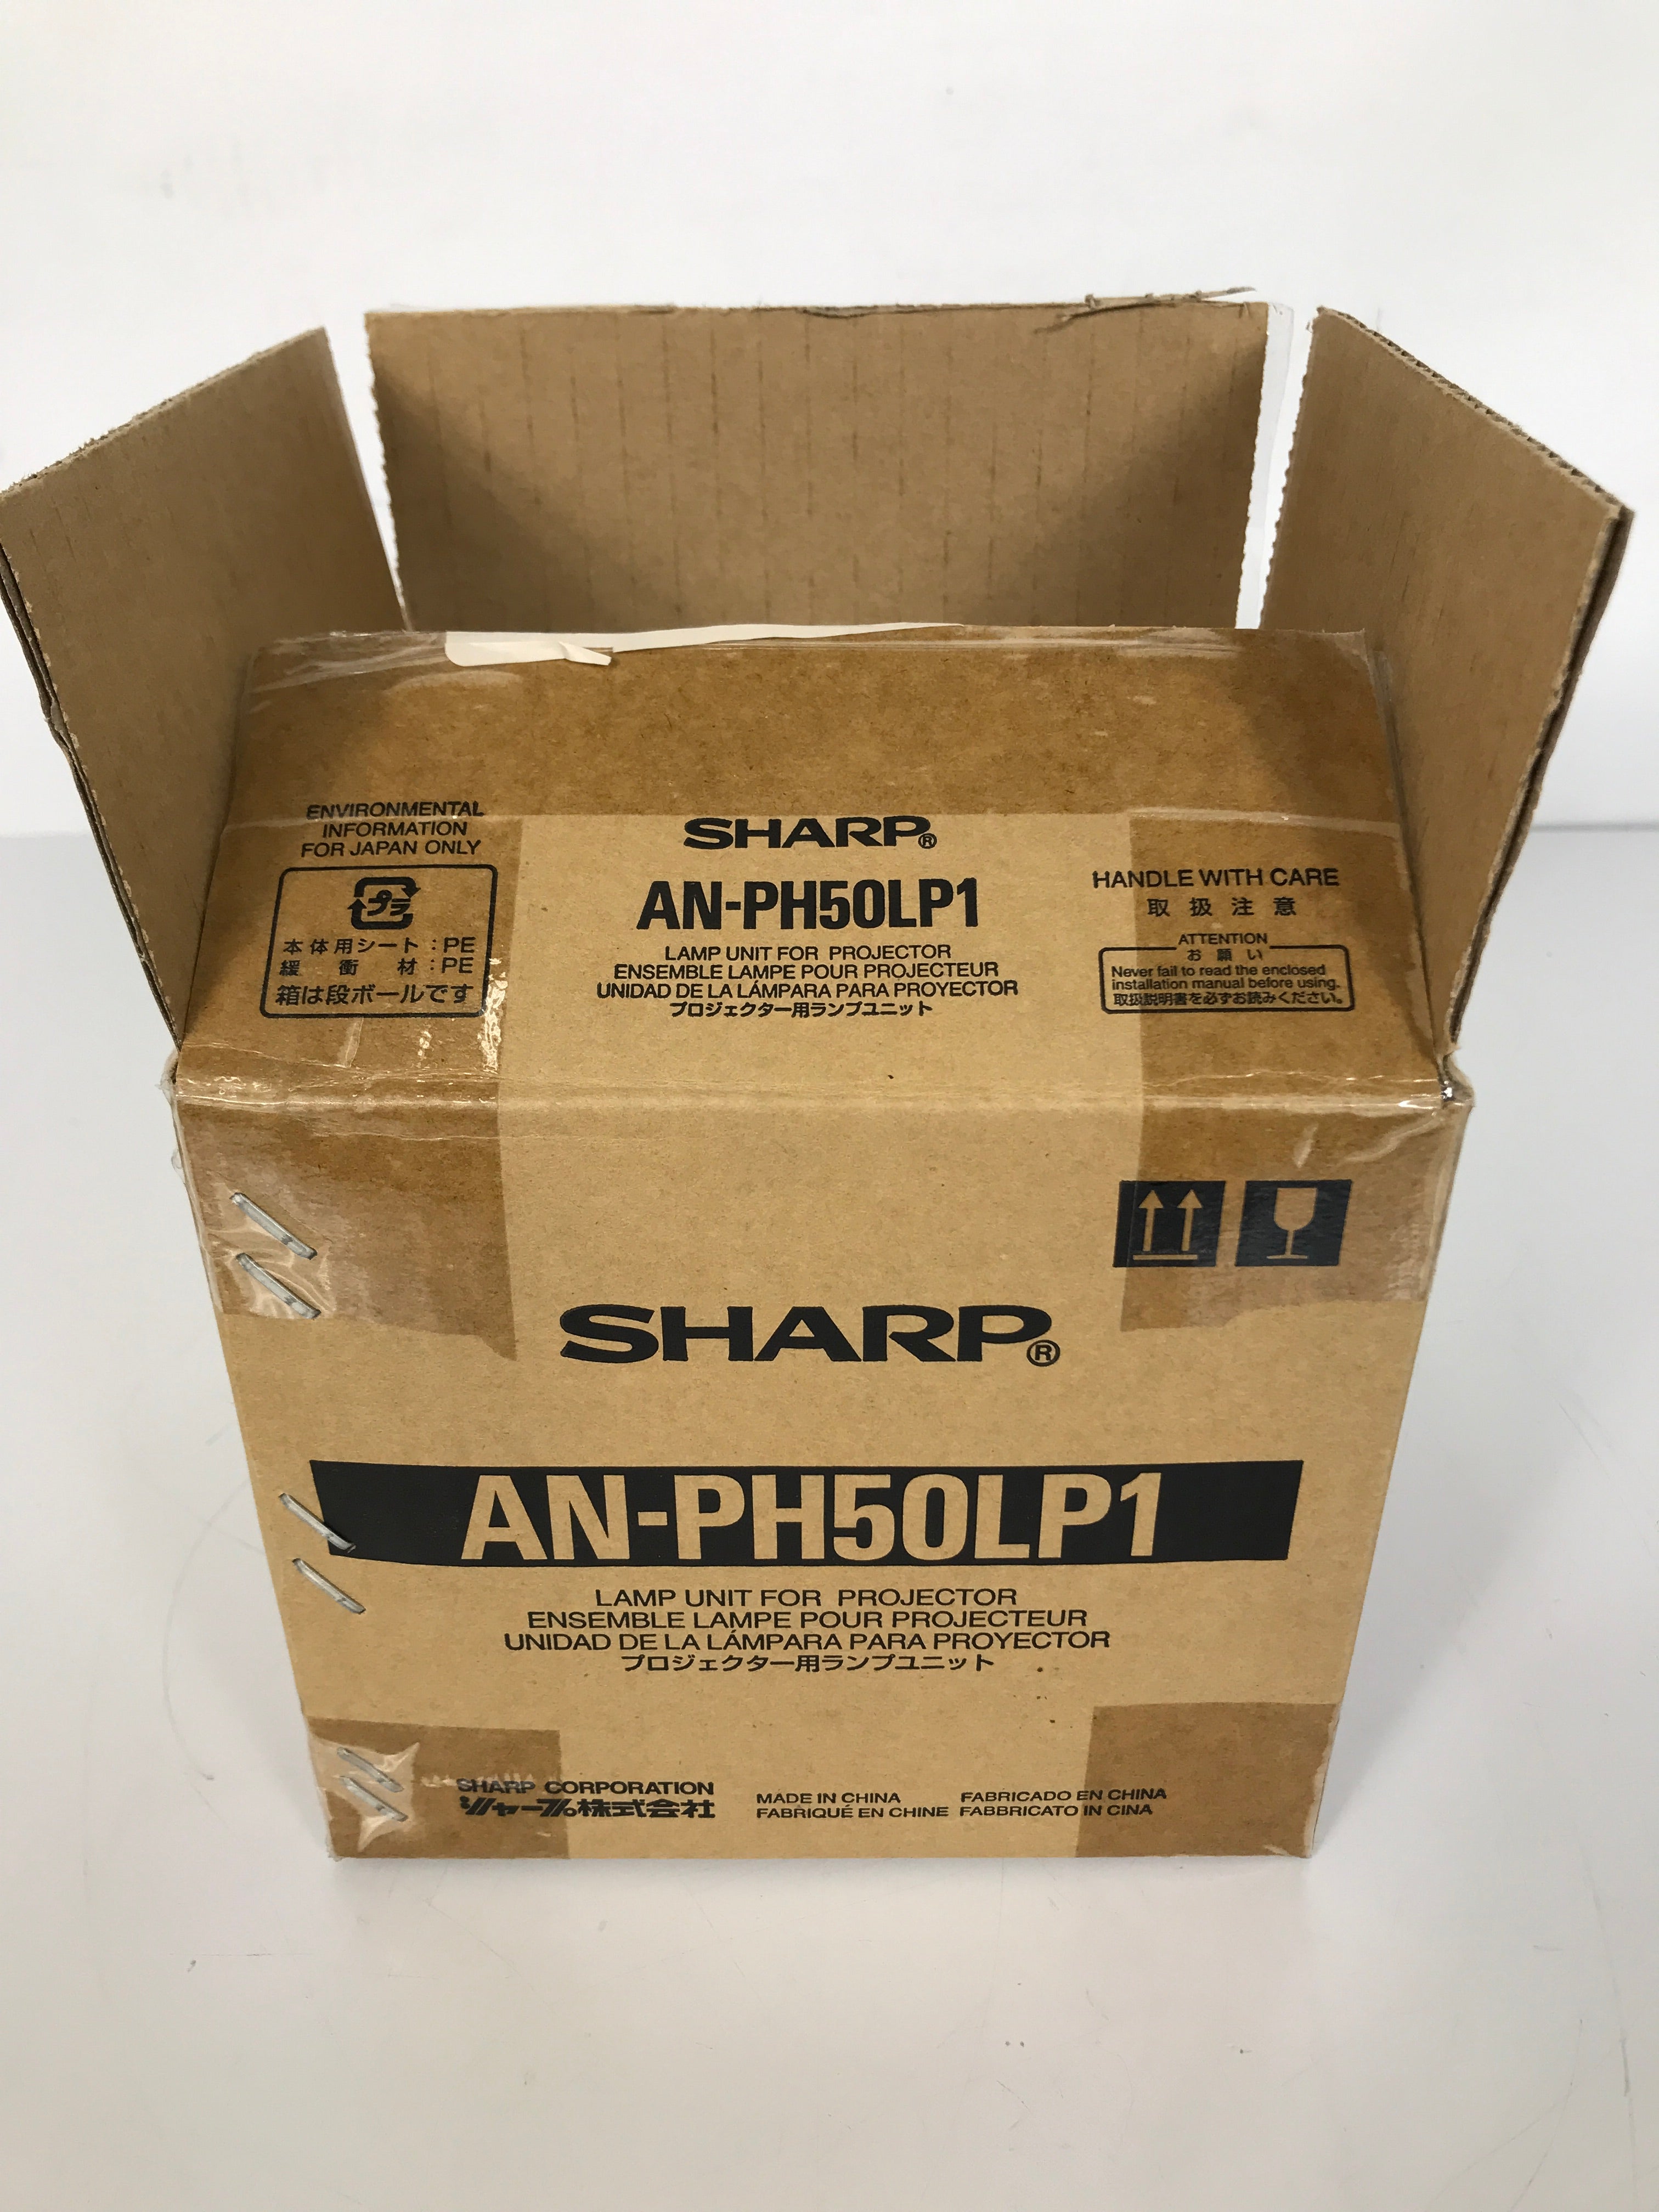 Sharp AN-PH50LP1 Lamp Unit for Projector *New*